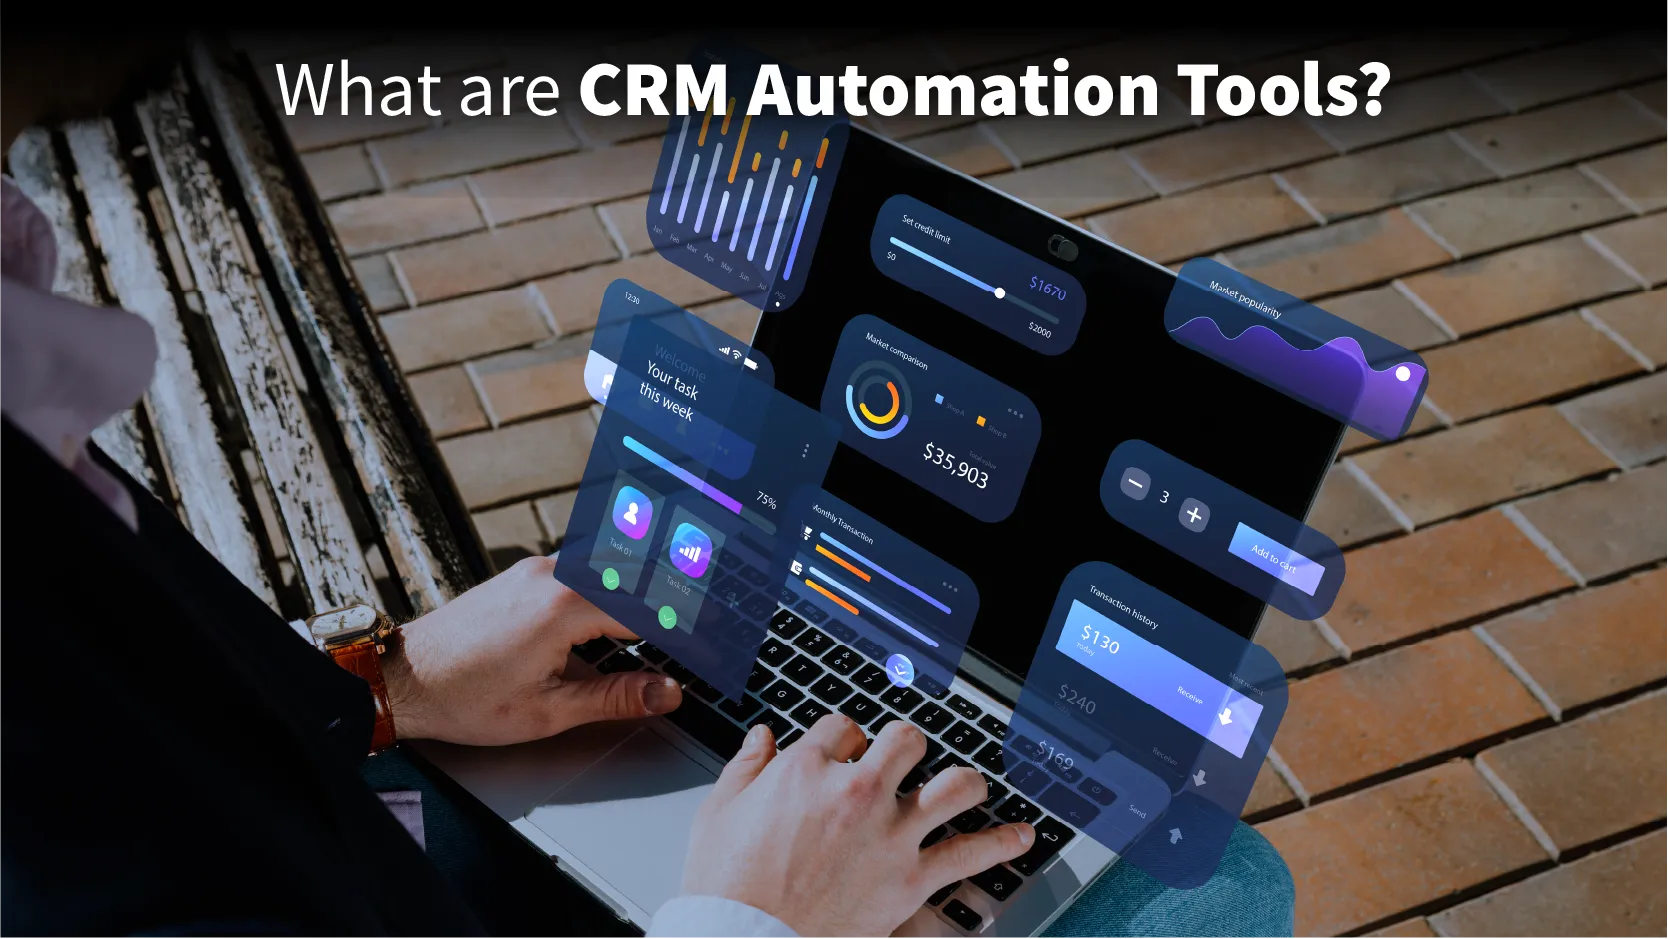 CRM Automation Tools